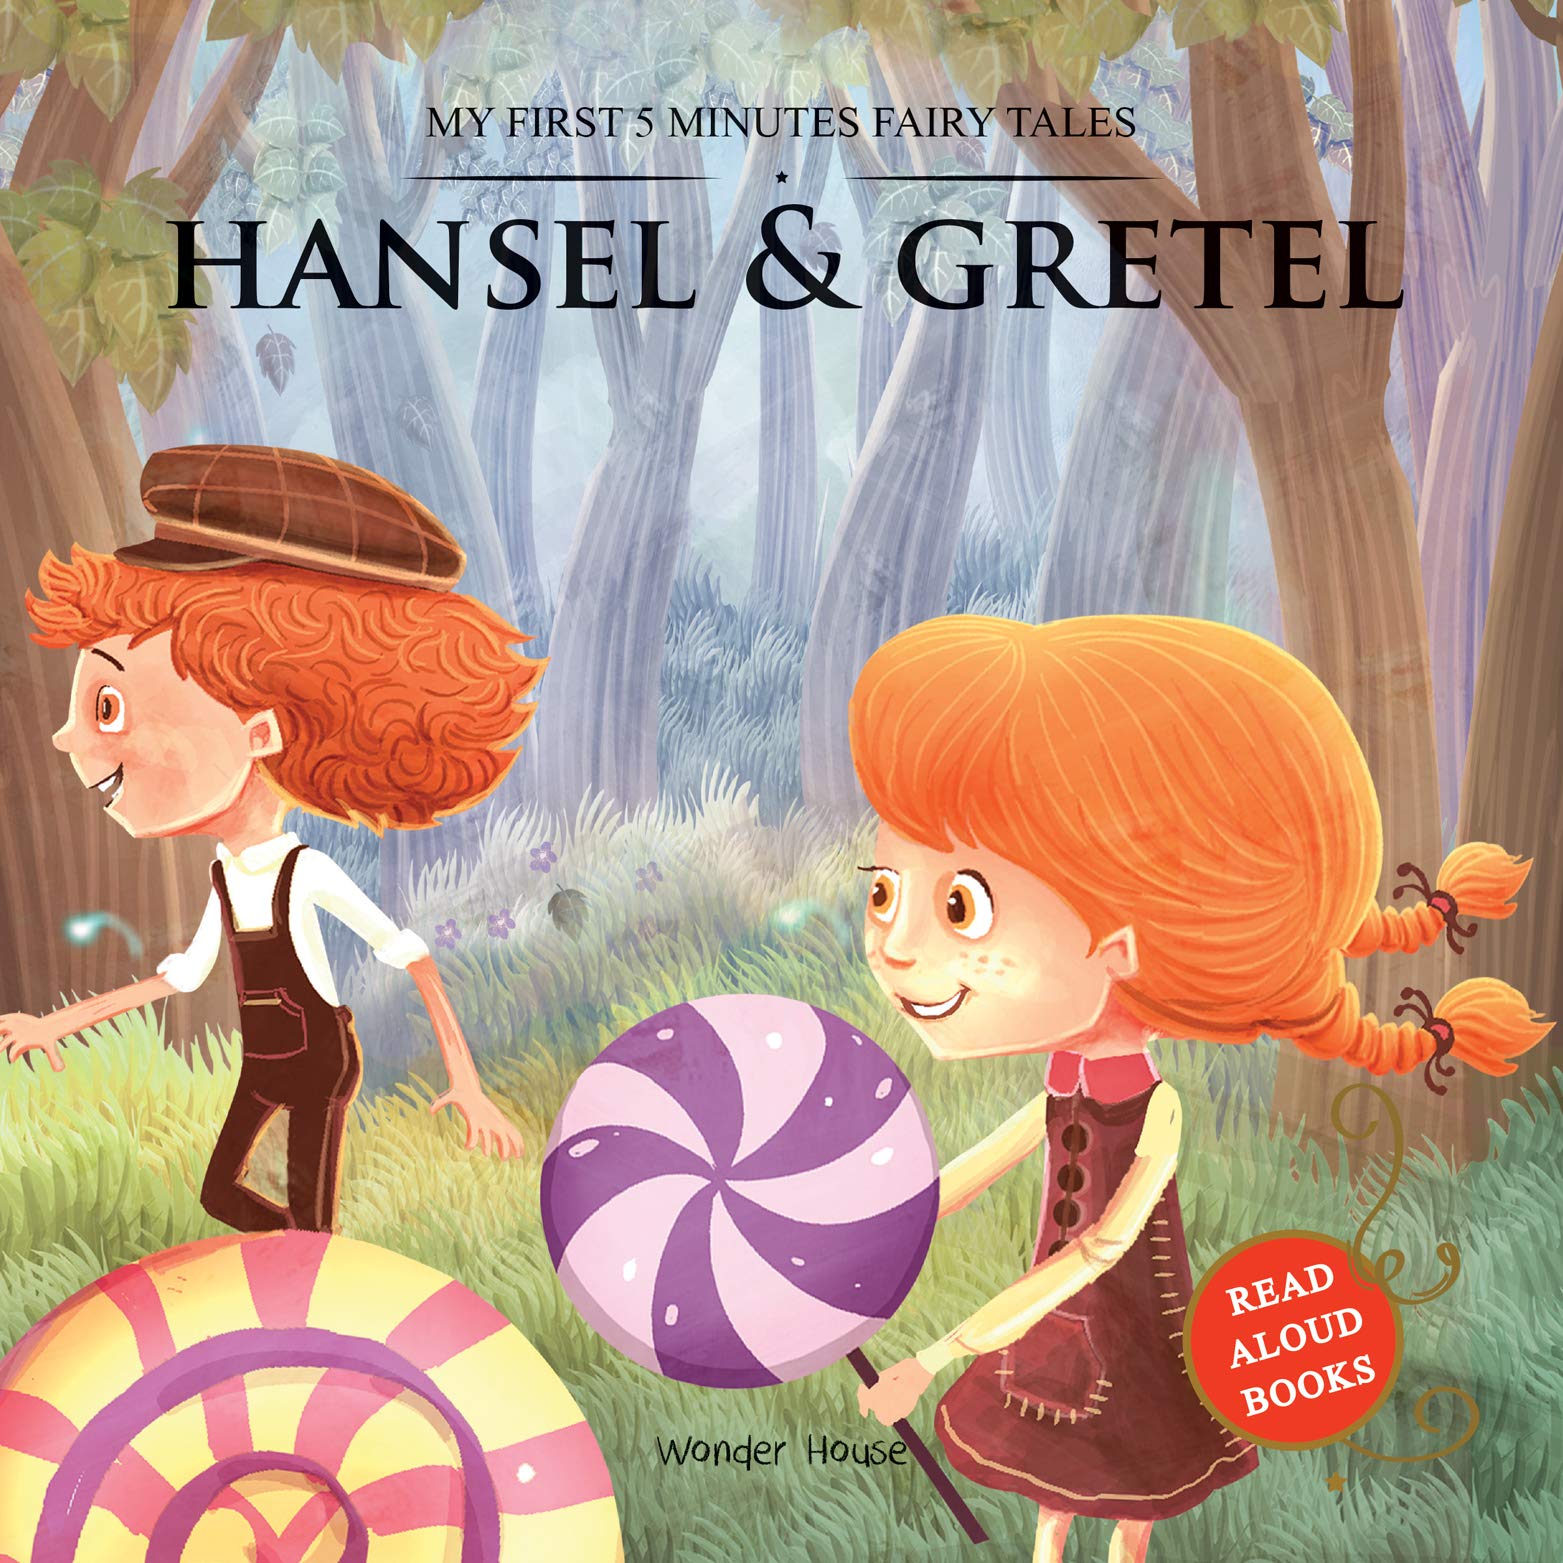 My First 5 Minutes Fairy Tales: Hansel & Gretel